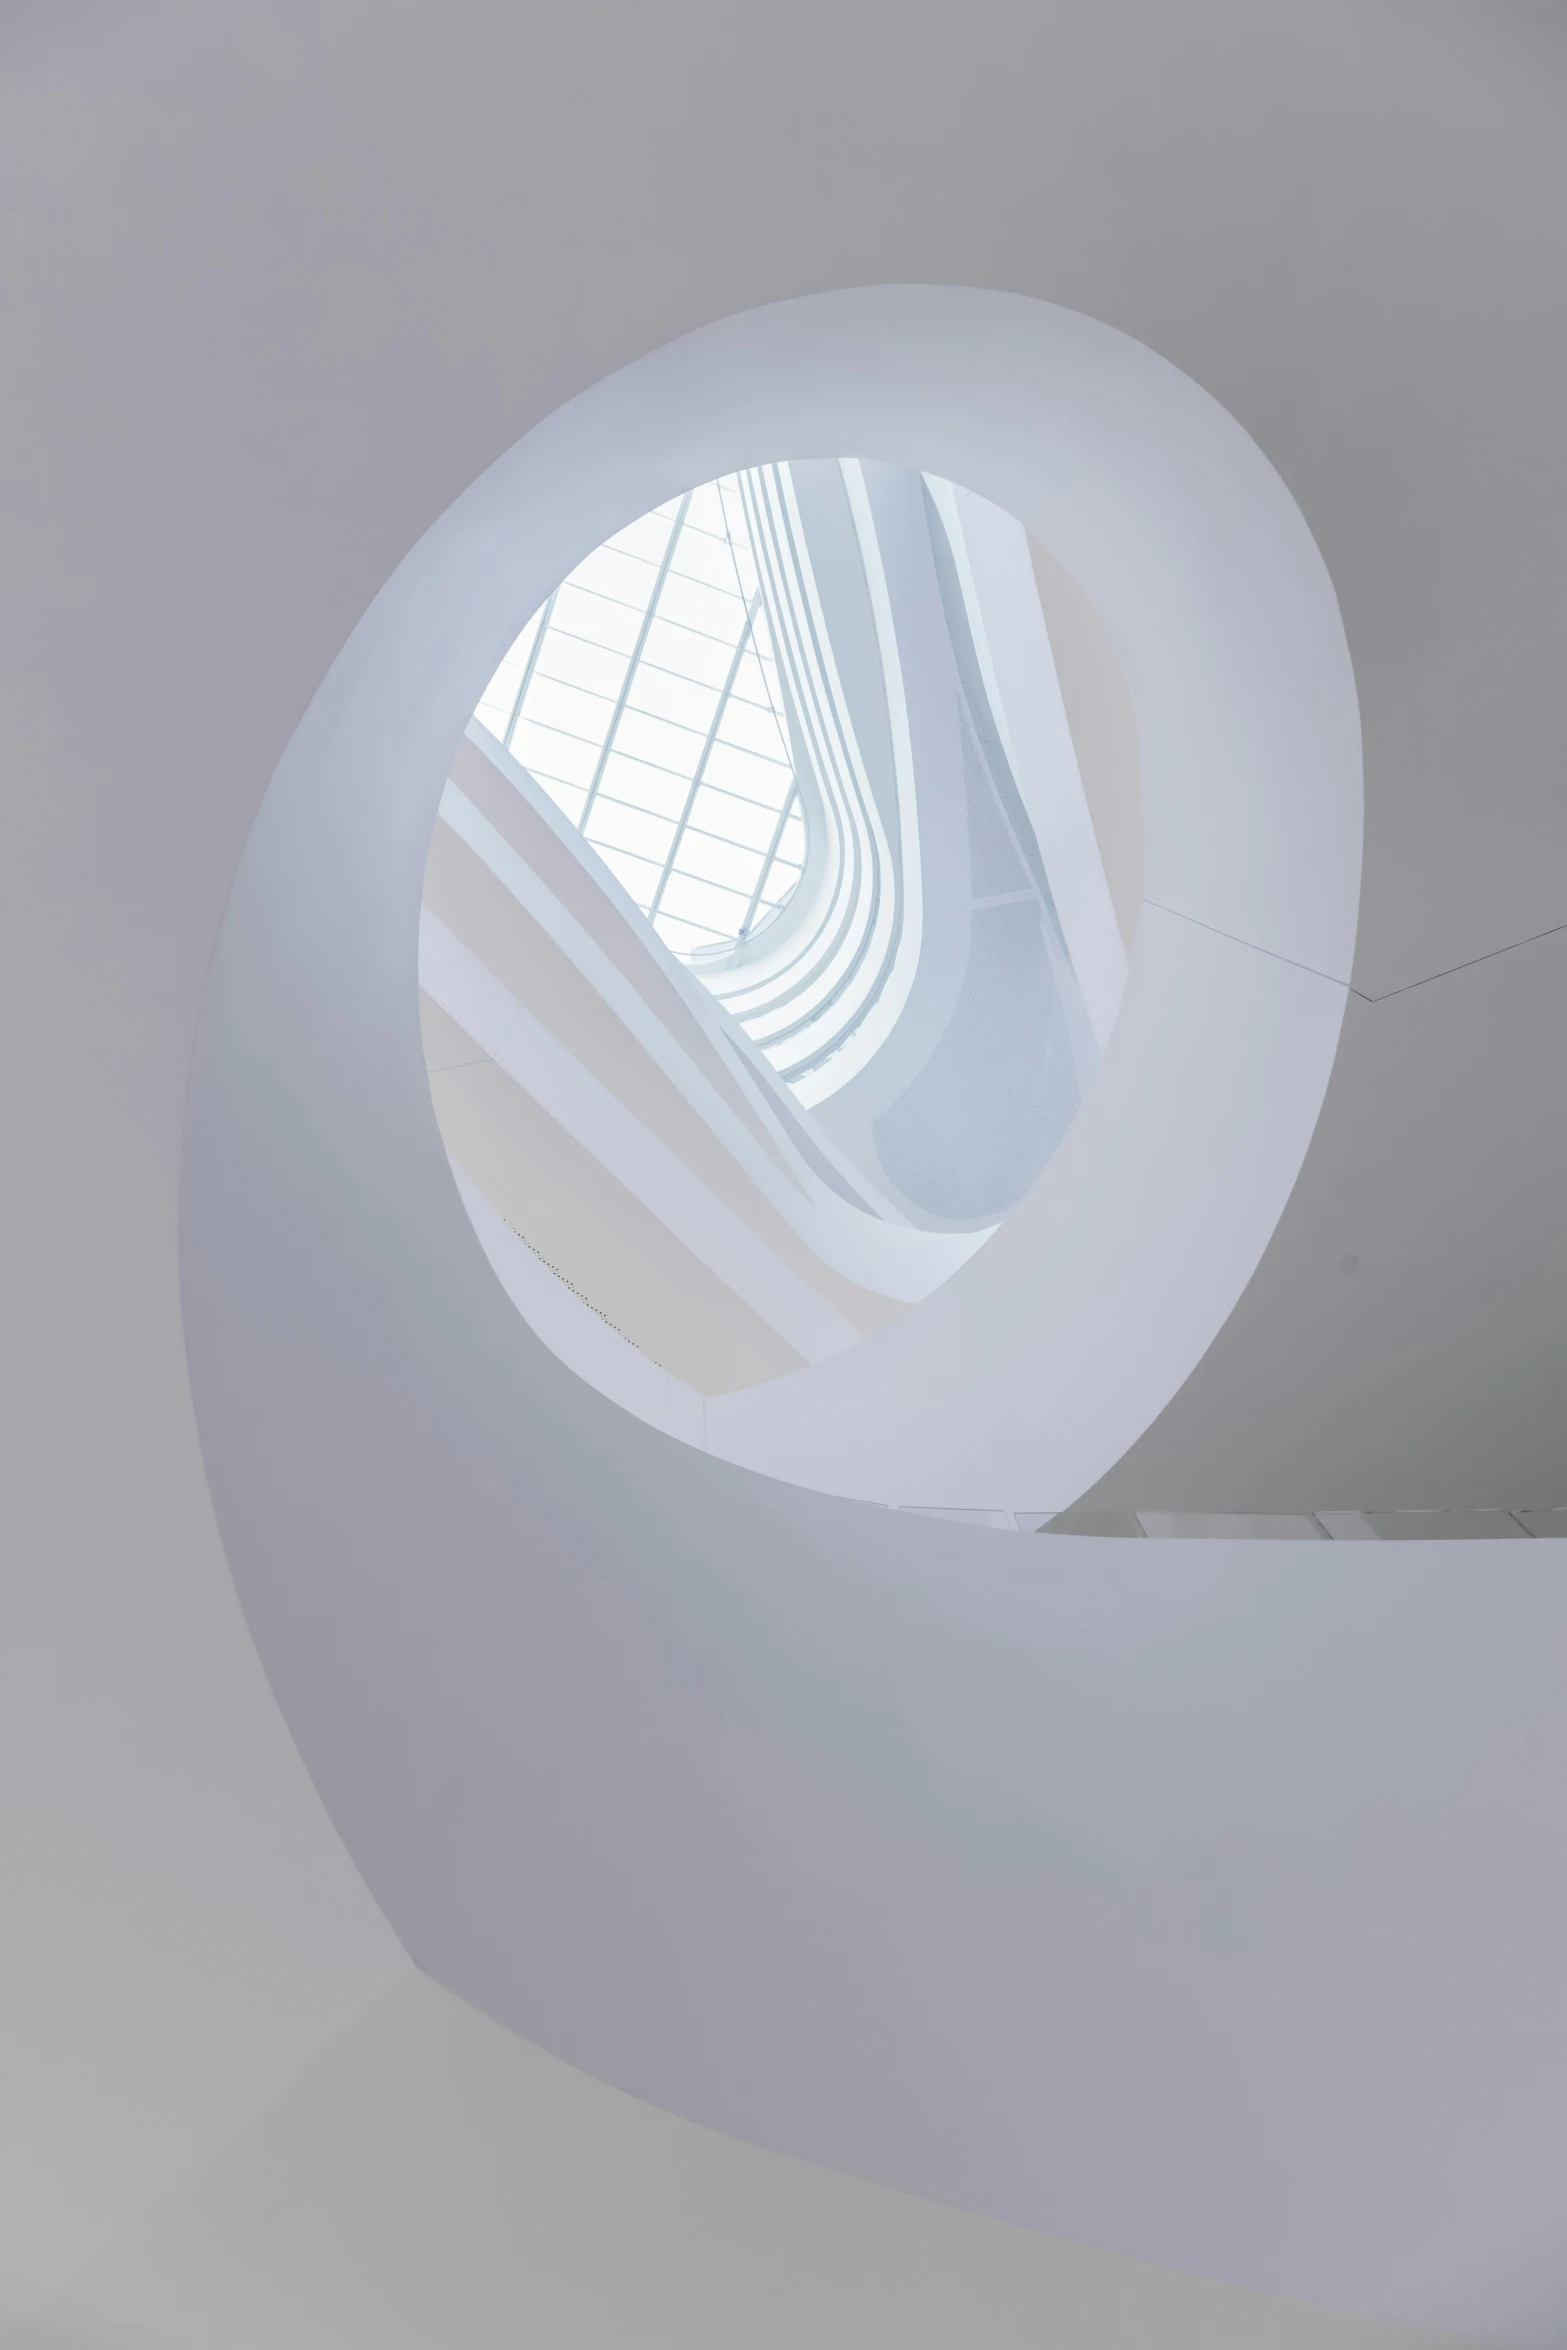 a round window shines through a very white room